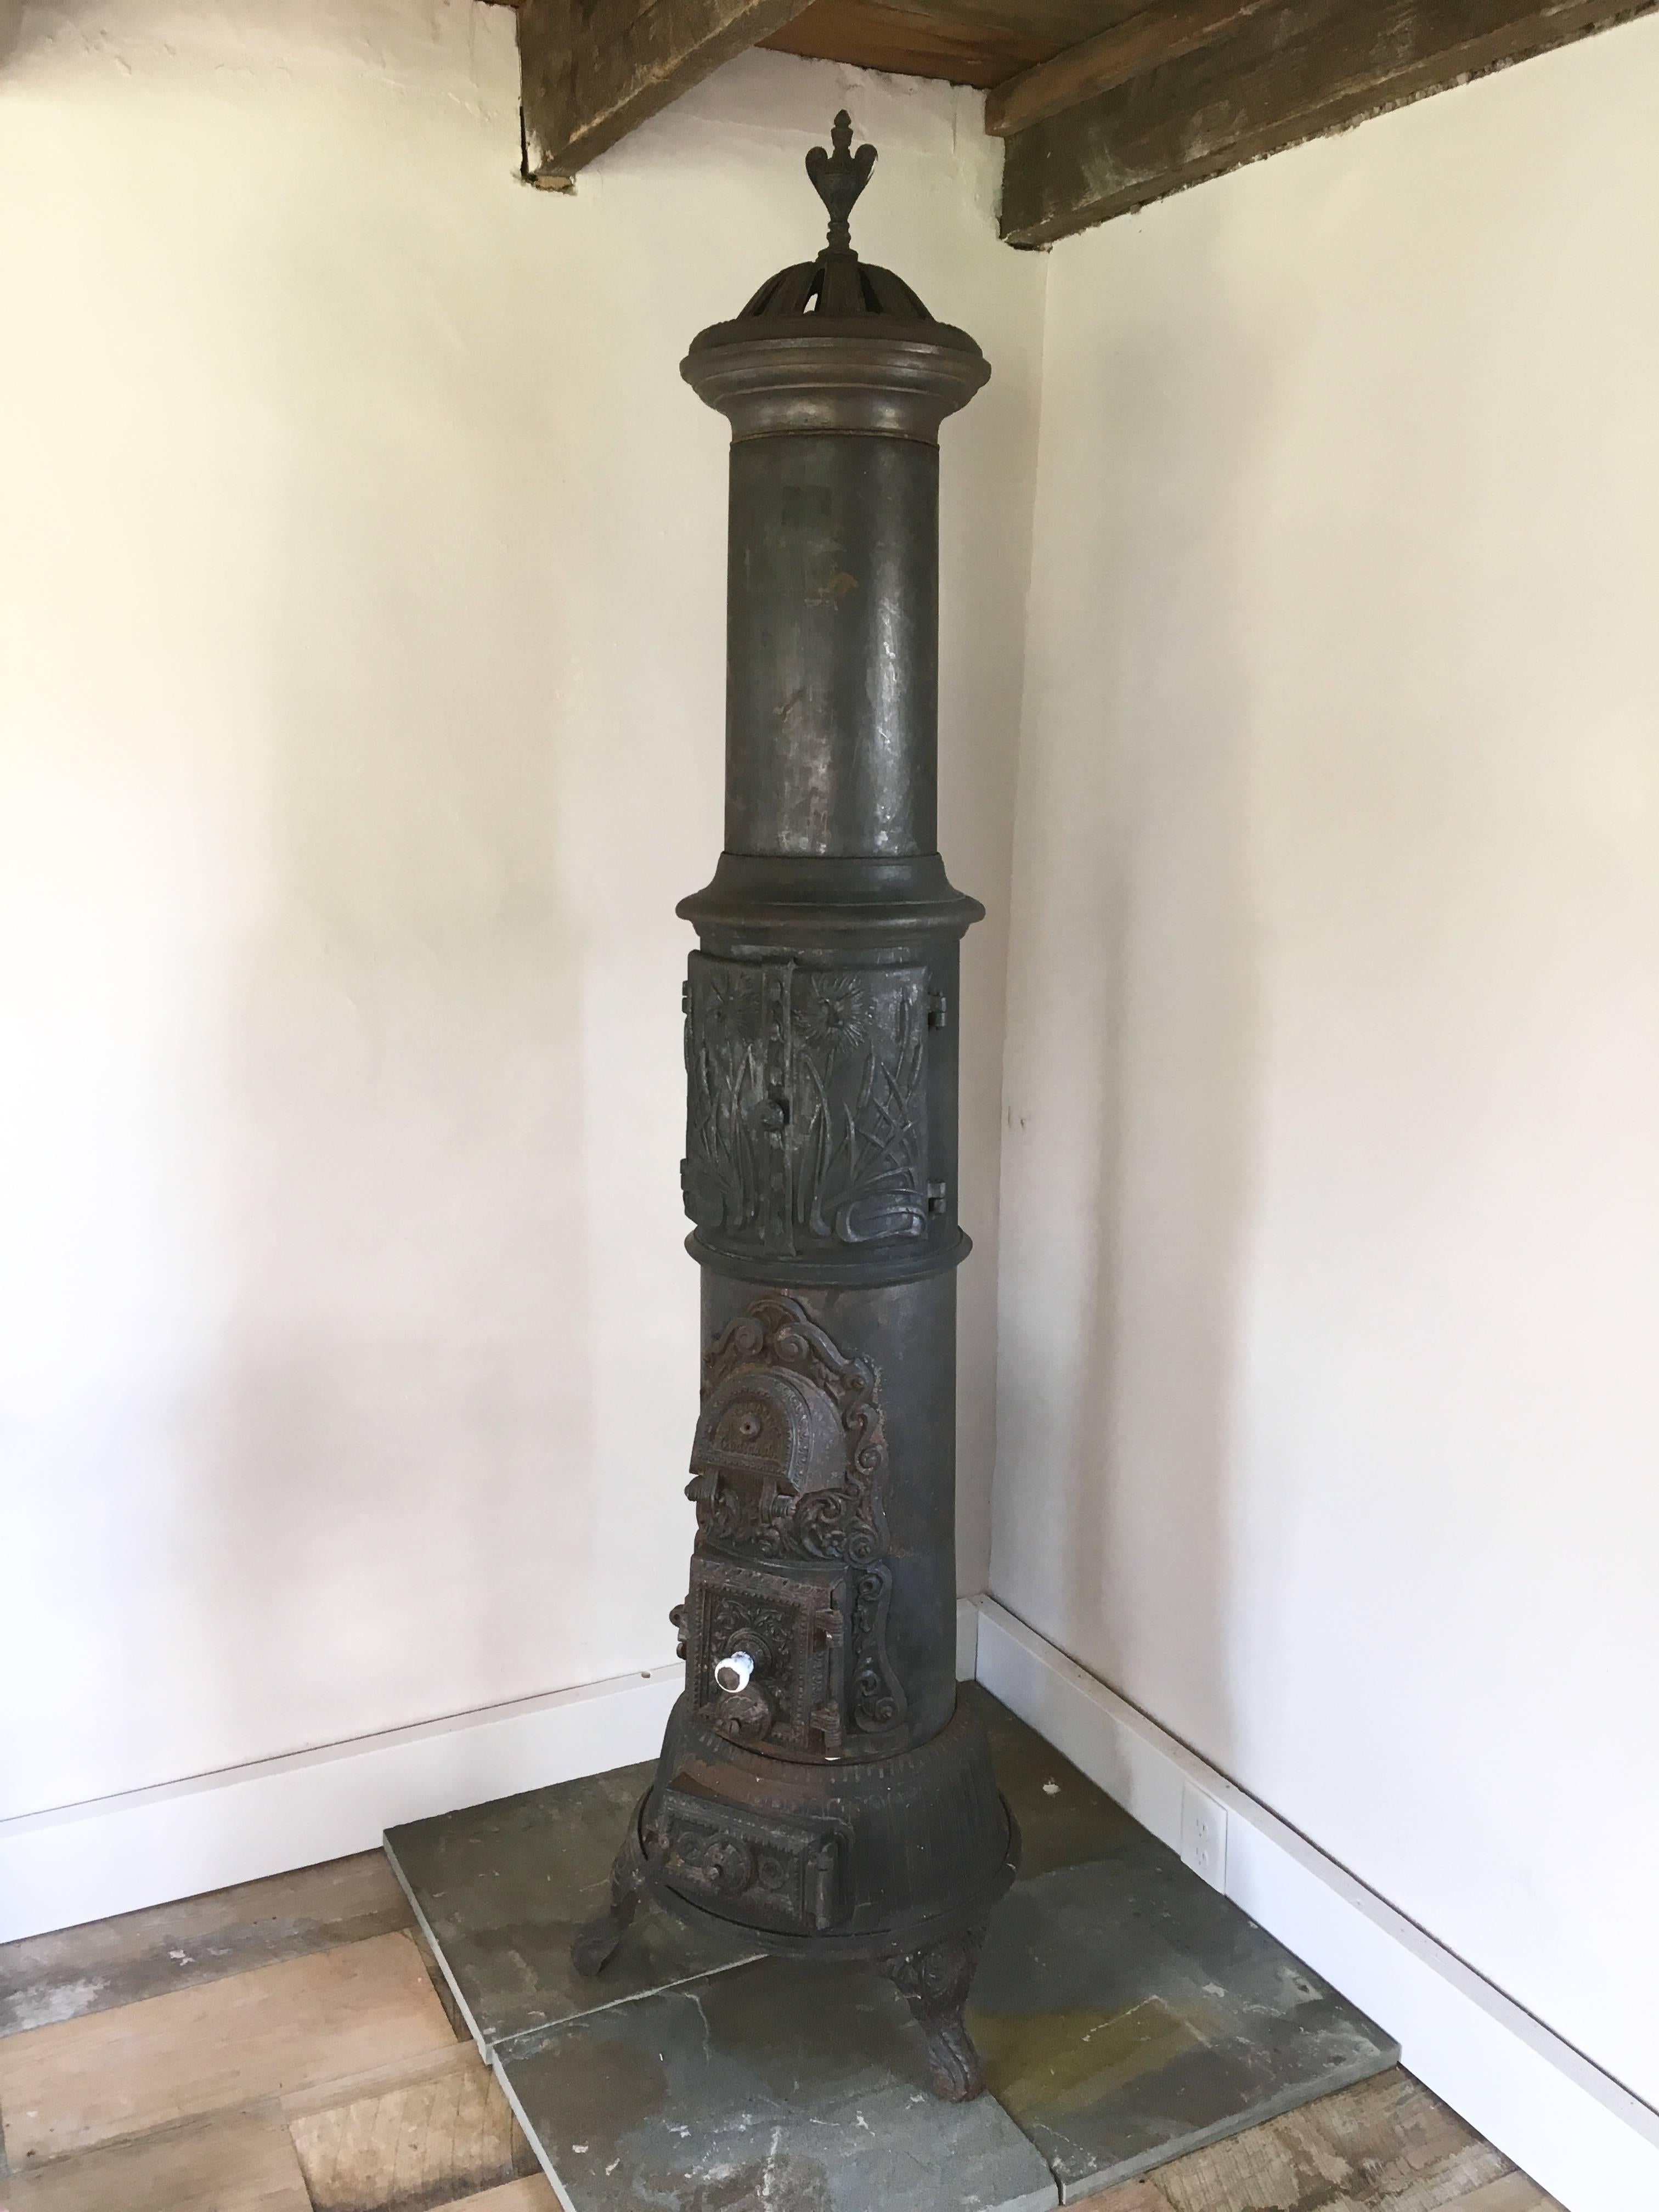 An unusual Swedish cast-iron parlour stove, circa 1850, with decorative embossing on several doors, a porcelain handle and a nice crown with finial on top. It appears to be functional with all parts present, but being sold as decorative since it has